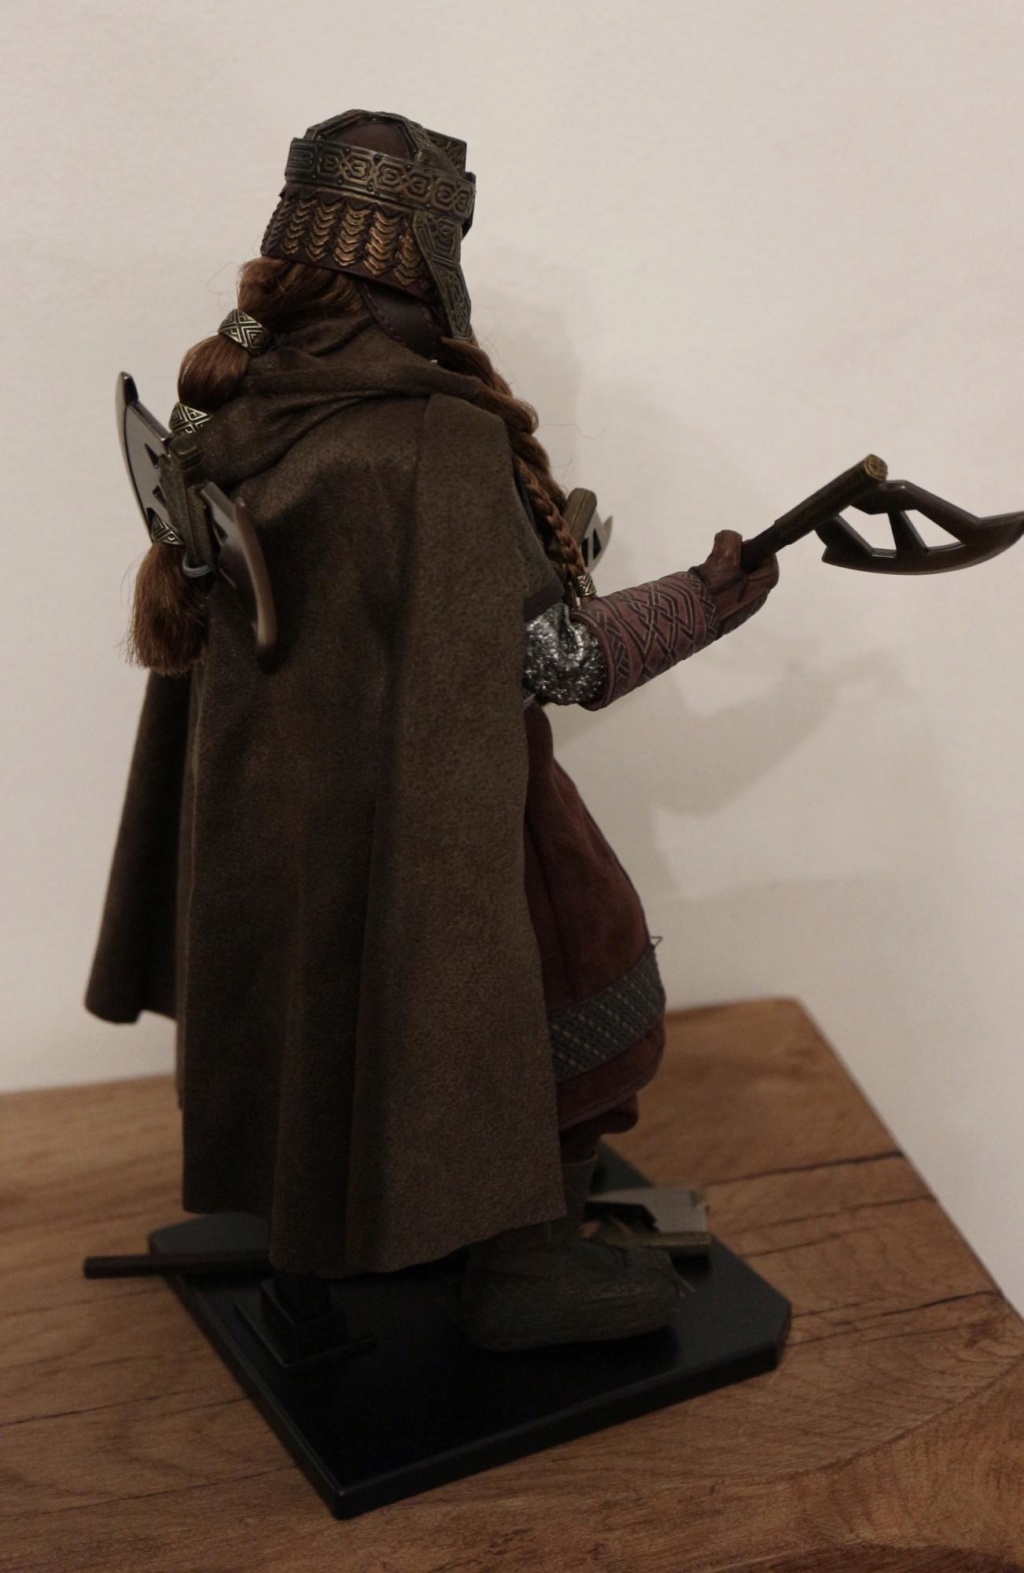 LordOfTheRings - NEW PRODUCT: Asmus Toys The Lord of the Rings Series: Gimli (LOTR018) - Page 2 Timeme17